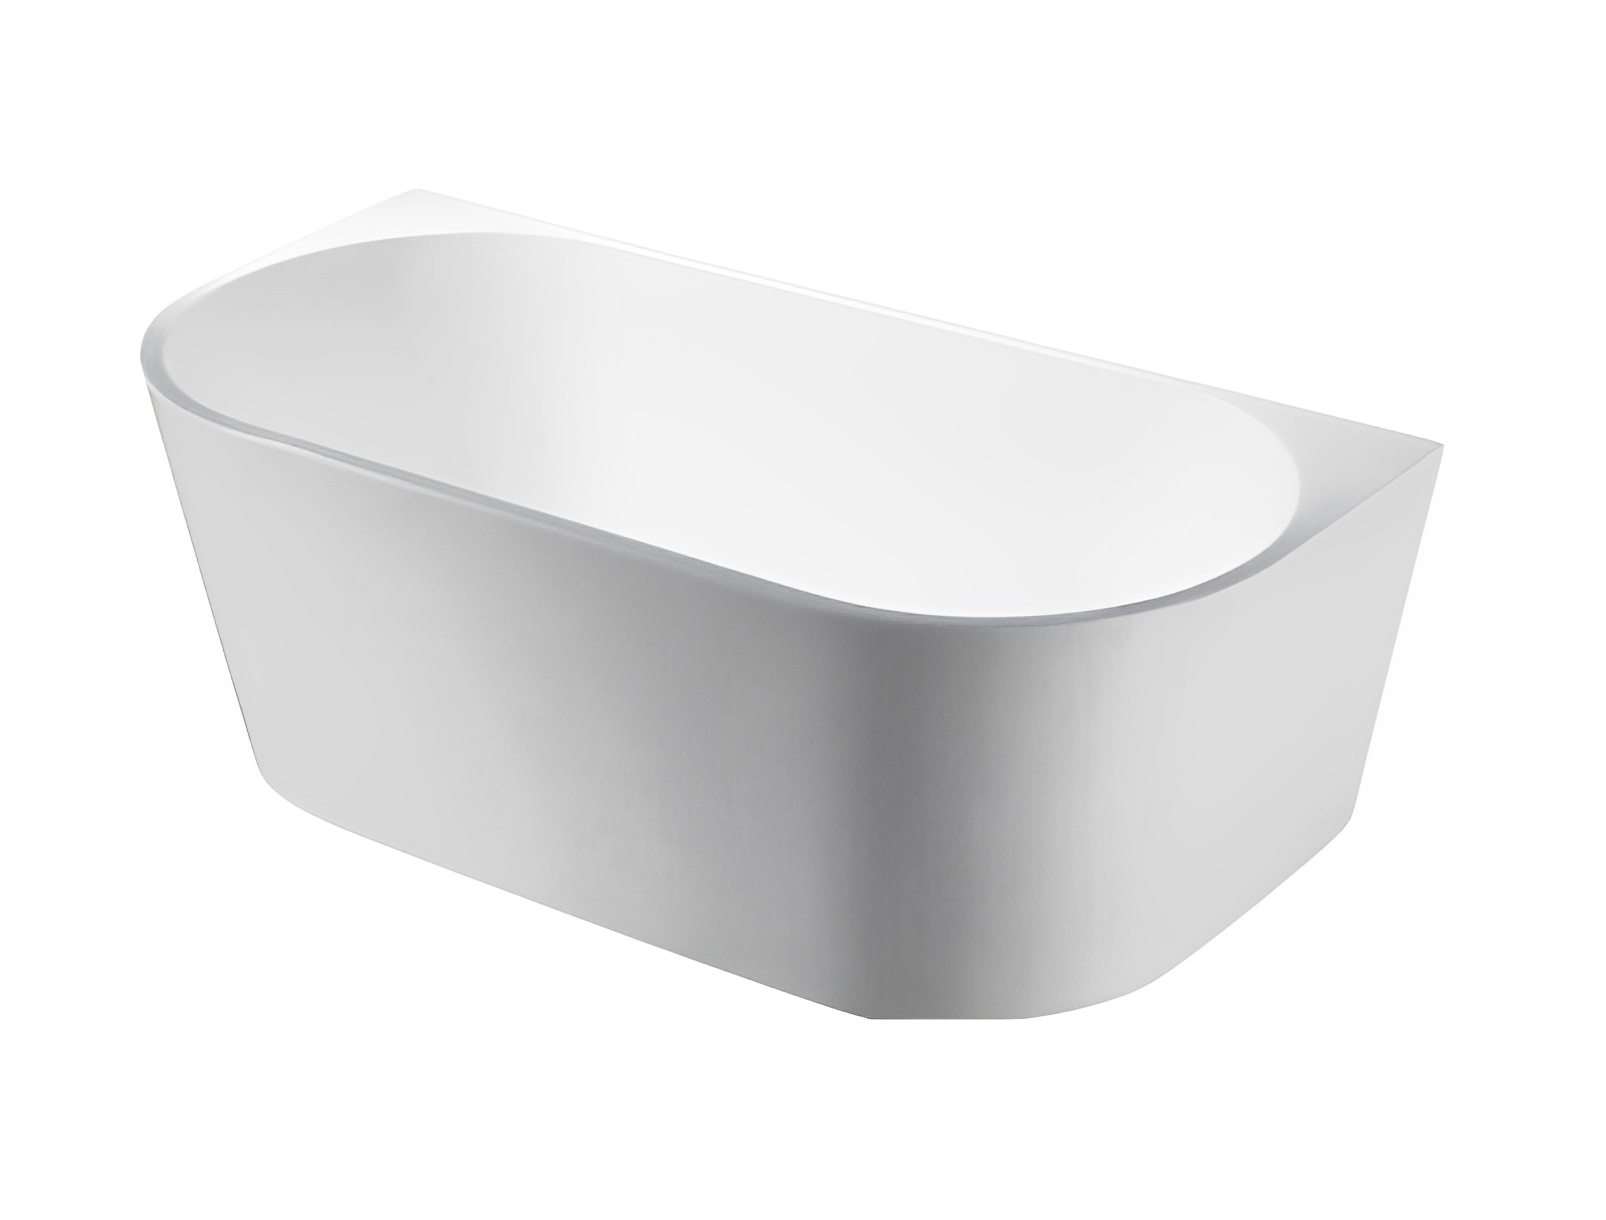 POSEIDON ELIVIA BACK TO WALL BATH MATTE WHITE (AVAILABLE IN 1400MM, 1500MM AND 1700MM)